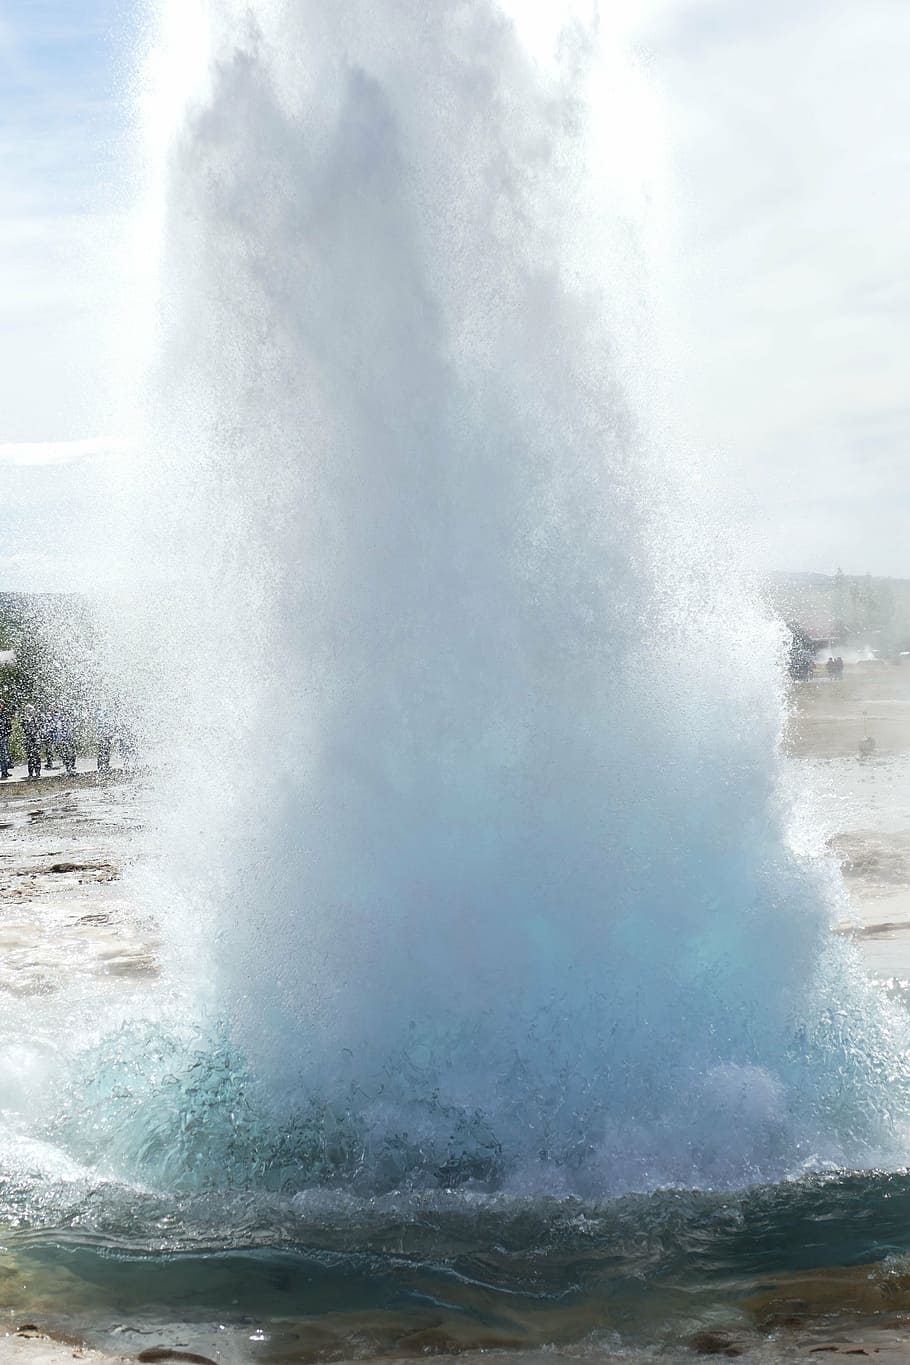 geyser, iceland, fountain, landscape, water, nature, strokkur, boiling water, places of interest, steam